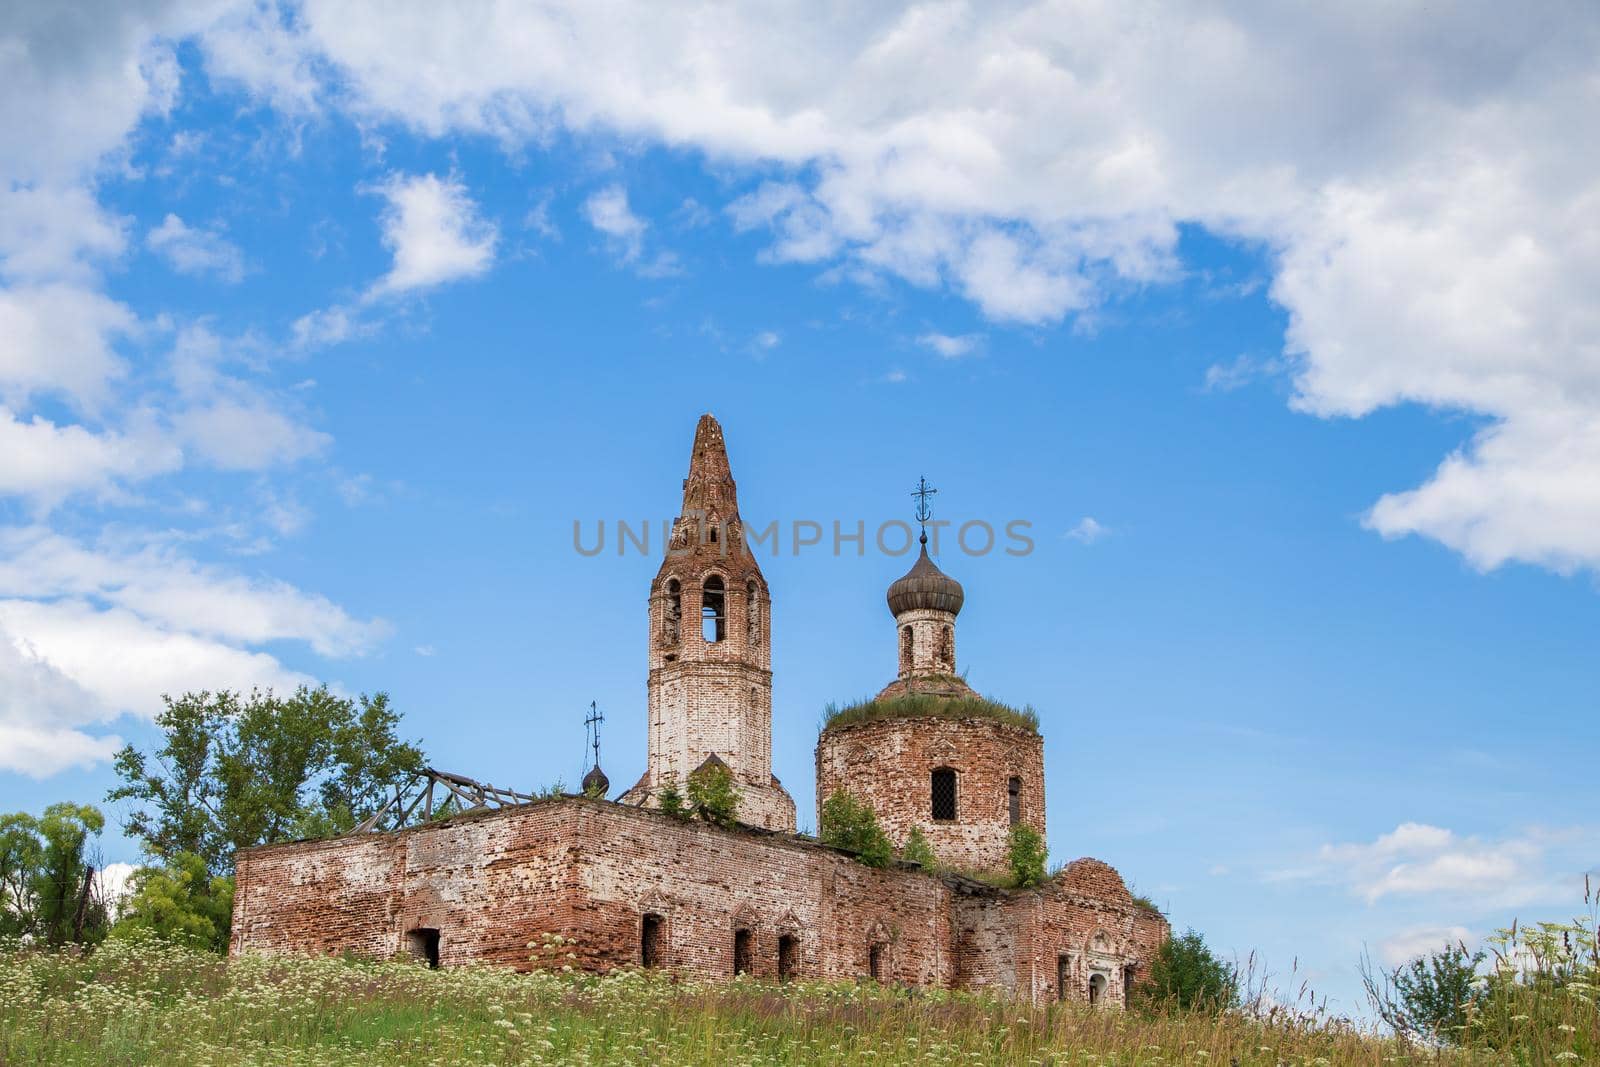 Antique destroyed cherkov against the blue sky. The red brick temple stands on a hill covered with green grass. Warm summer day.